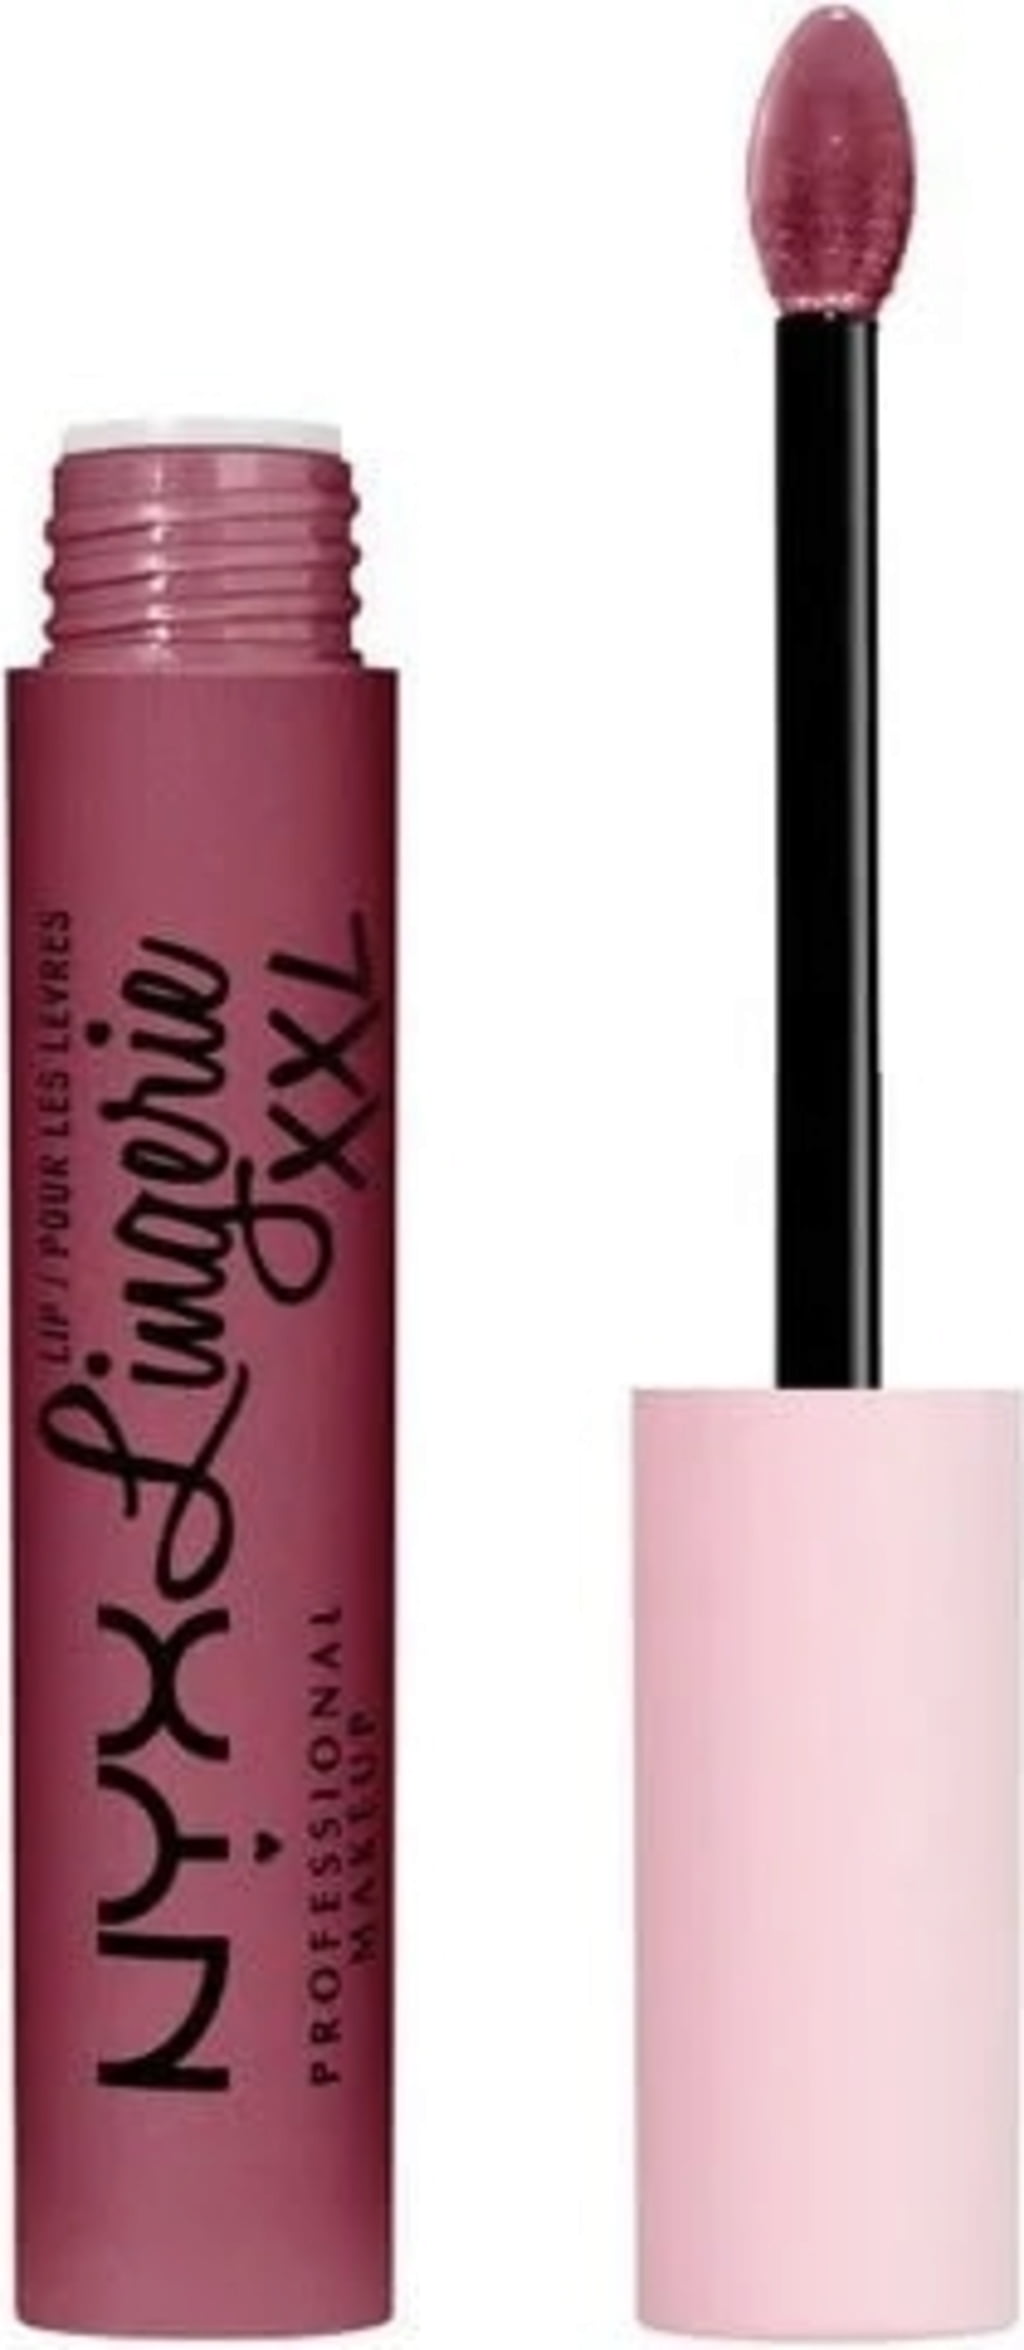 In Stock! Factory Price High Quality NYX LIP LINGERIE NYX Matte